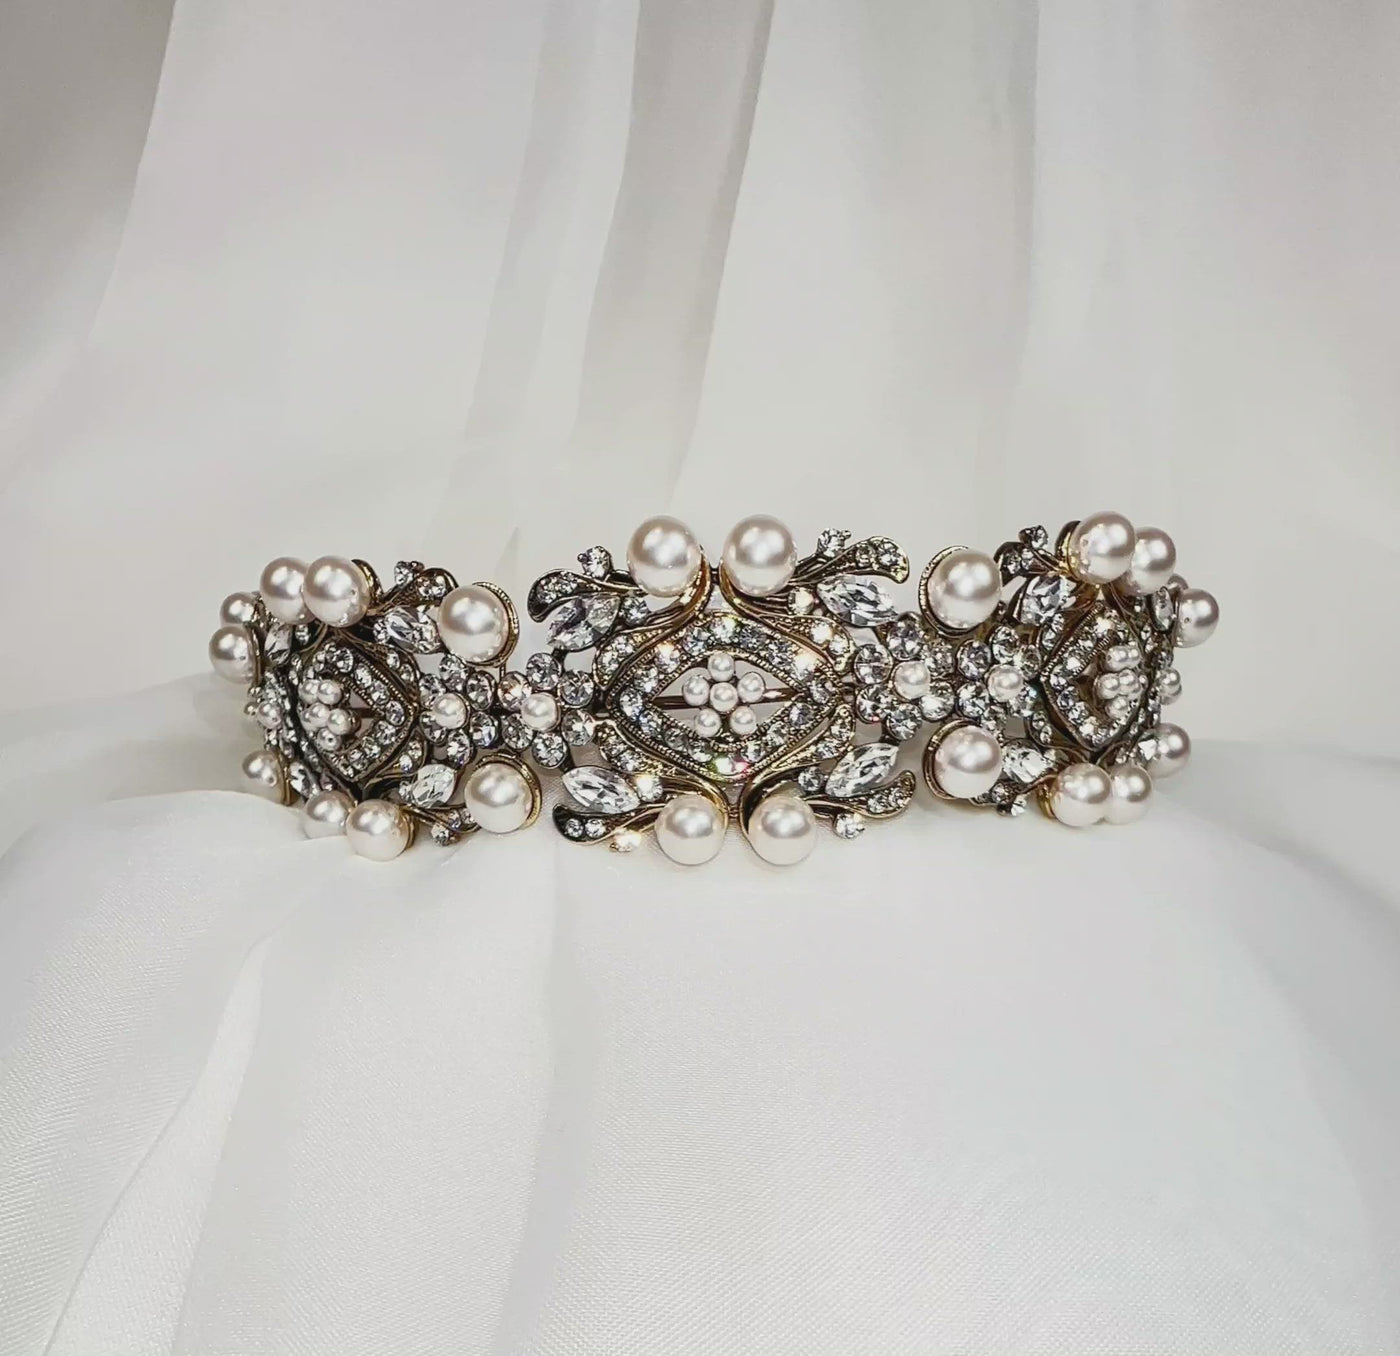 bridal headband with antique gold swirling and floral detailing surrounding sparkling, round crystals and large pearls